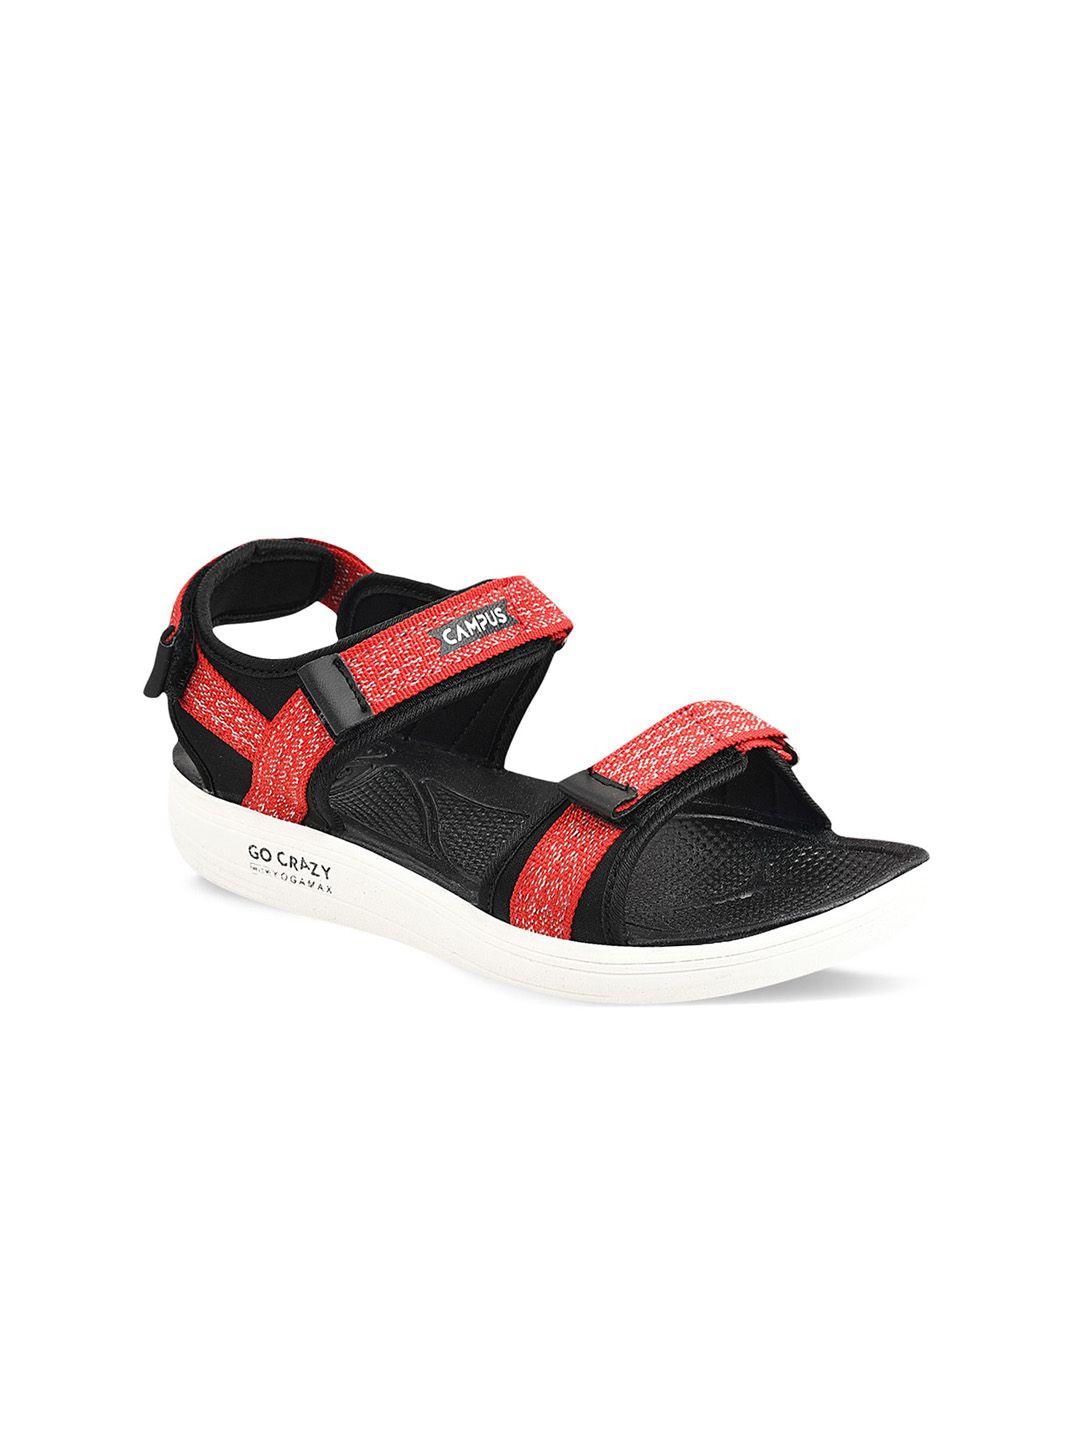 campus women black & red solid sports sandals